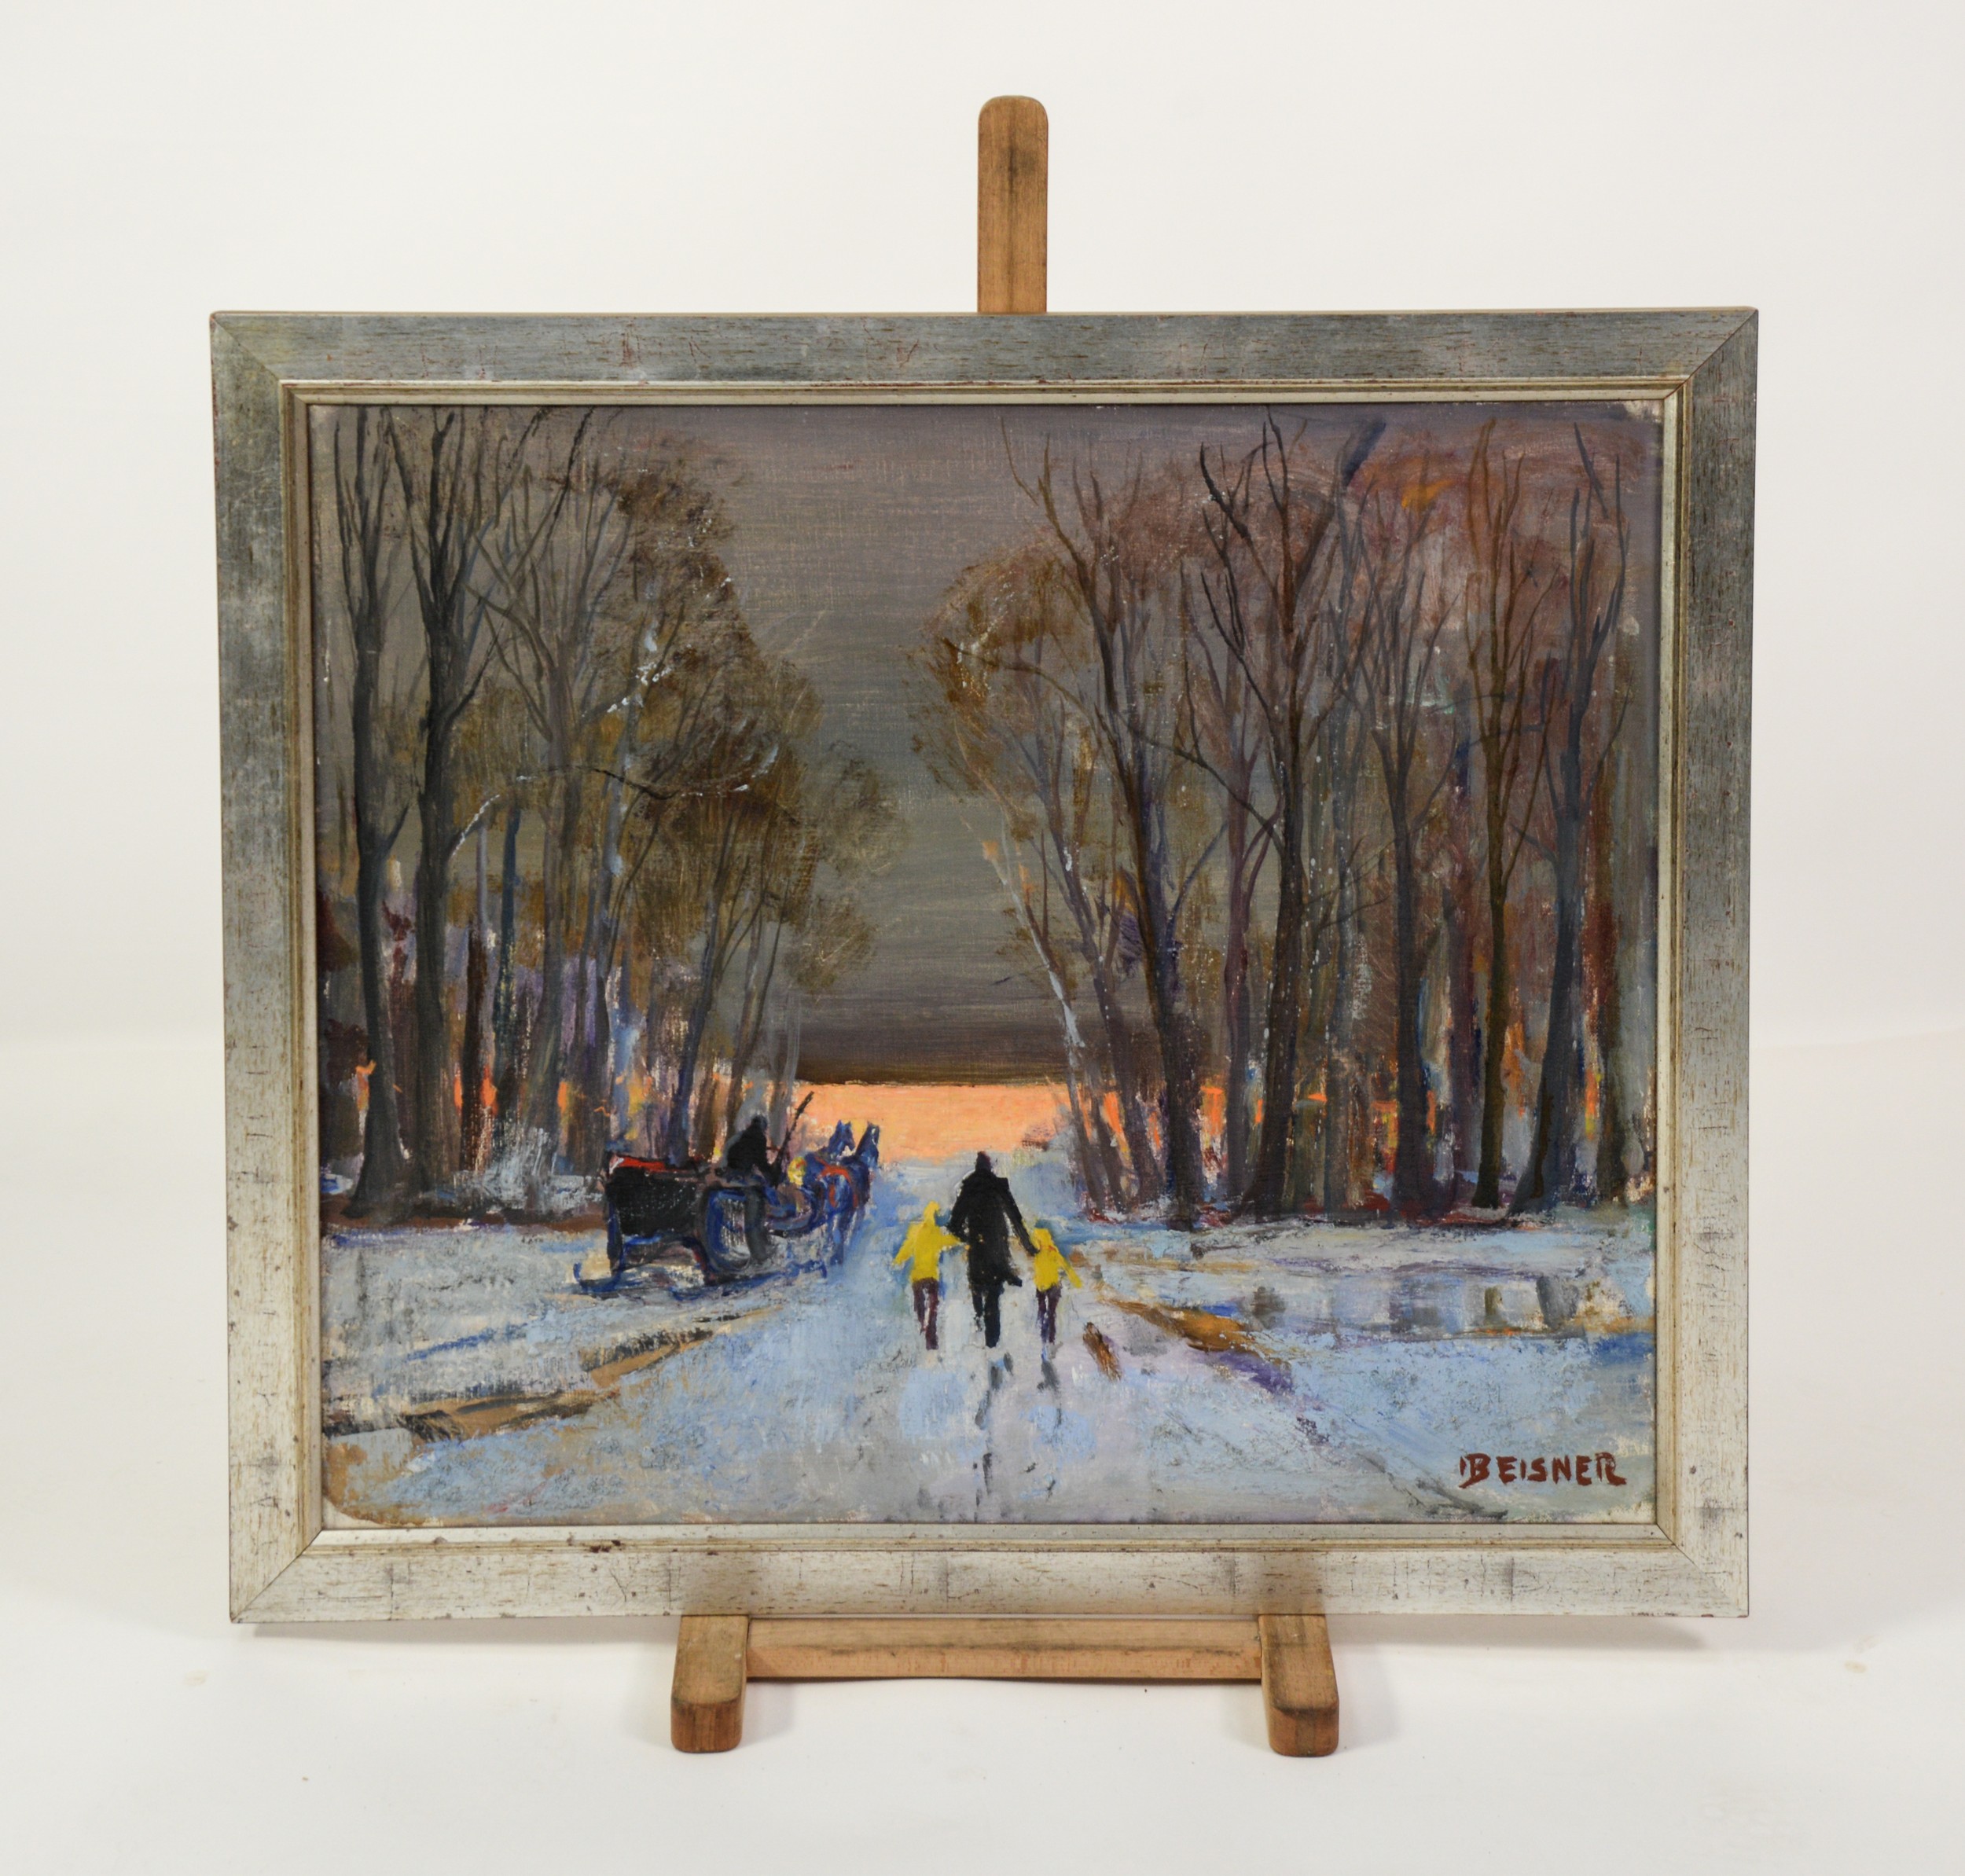 IB EISNER (Dk. 1925-2003) OIL ON CANVAS 'Winter Evening in Dyrehaven' Signed lower right 60 cm x - Image 2 of 2